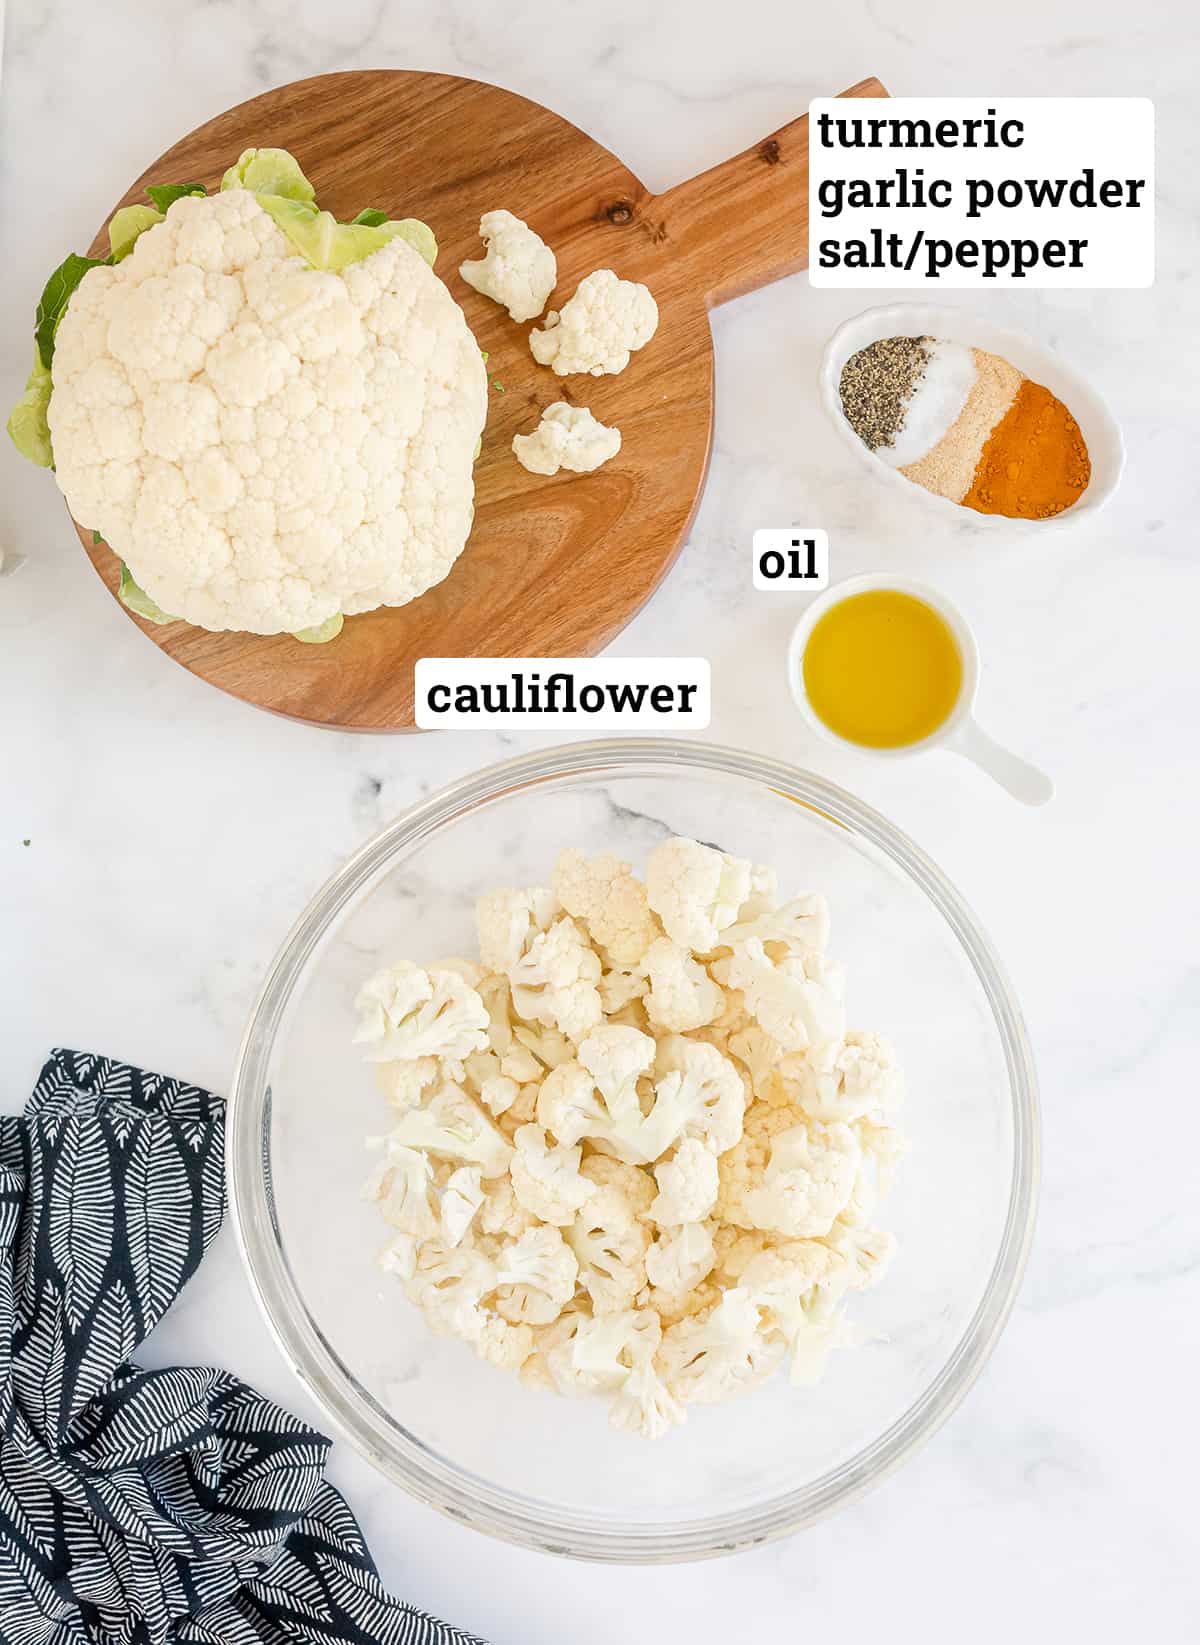 The ingredients for Turmeric Roasted Cauliflower with text overlay.